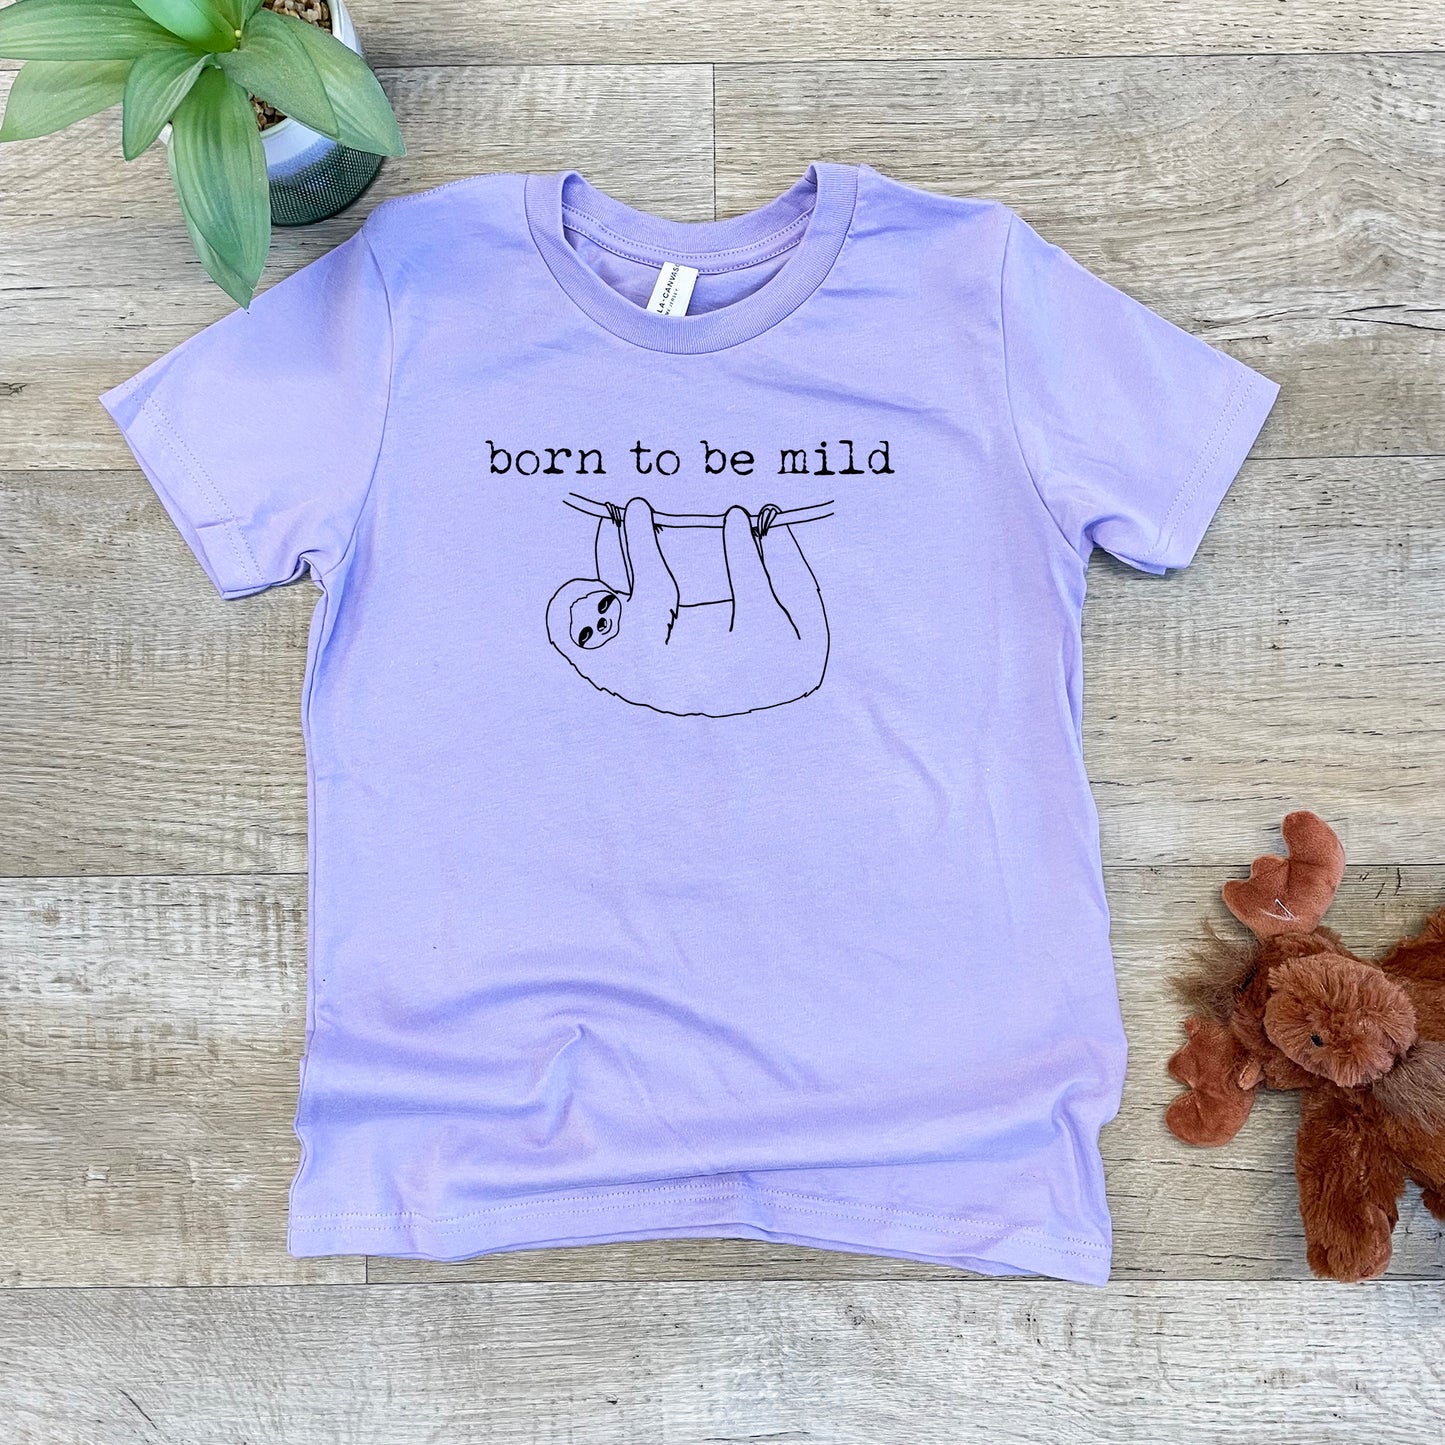 Born To Be Mild (Sloth) - Kid's Tee - Columbia Blue or Lavender